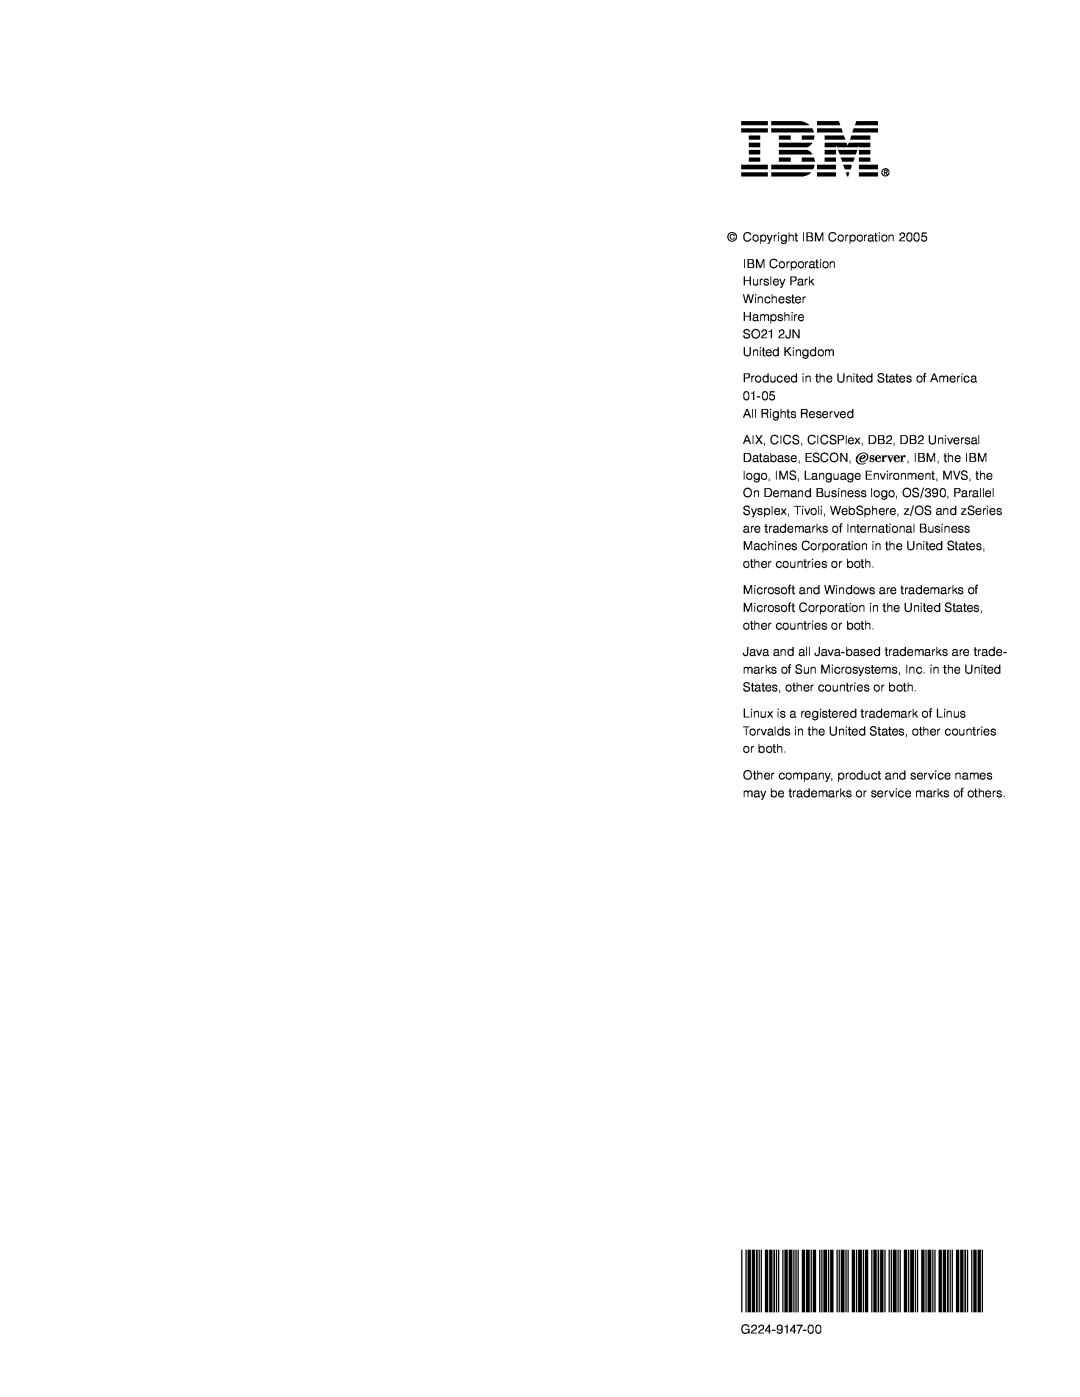 IBM 3.1 manual Copyright IBM Corporation, Produced in the United States of America All Rights Reserved, G224-9147-00 